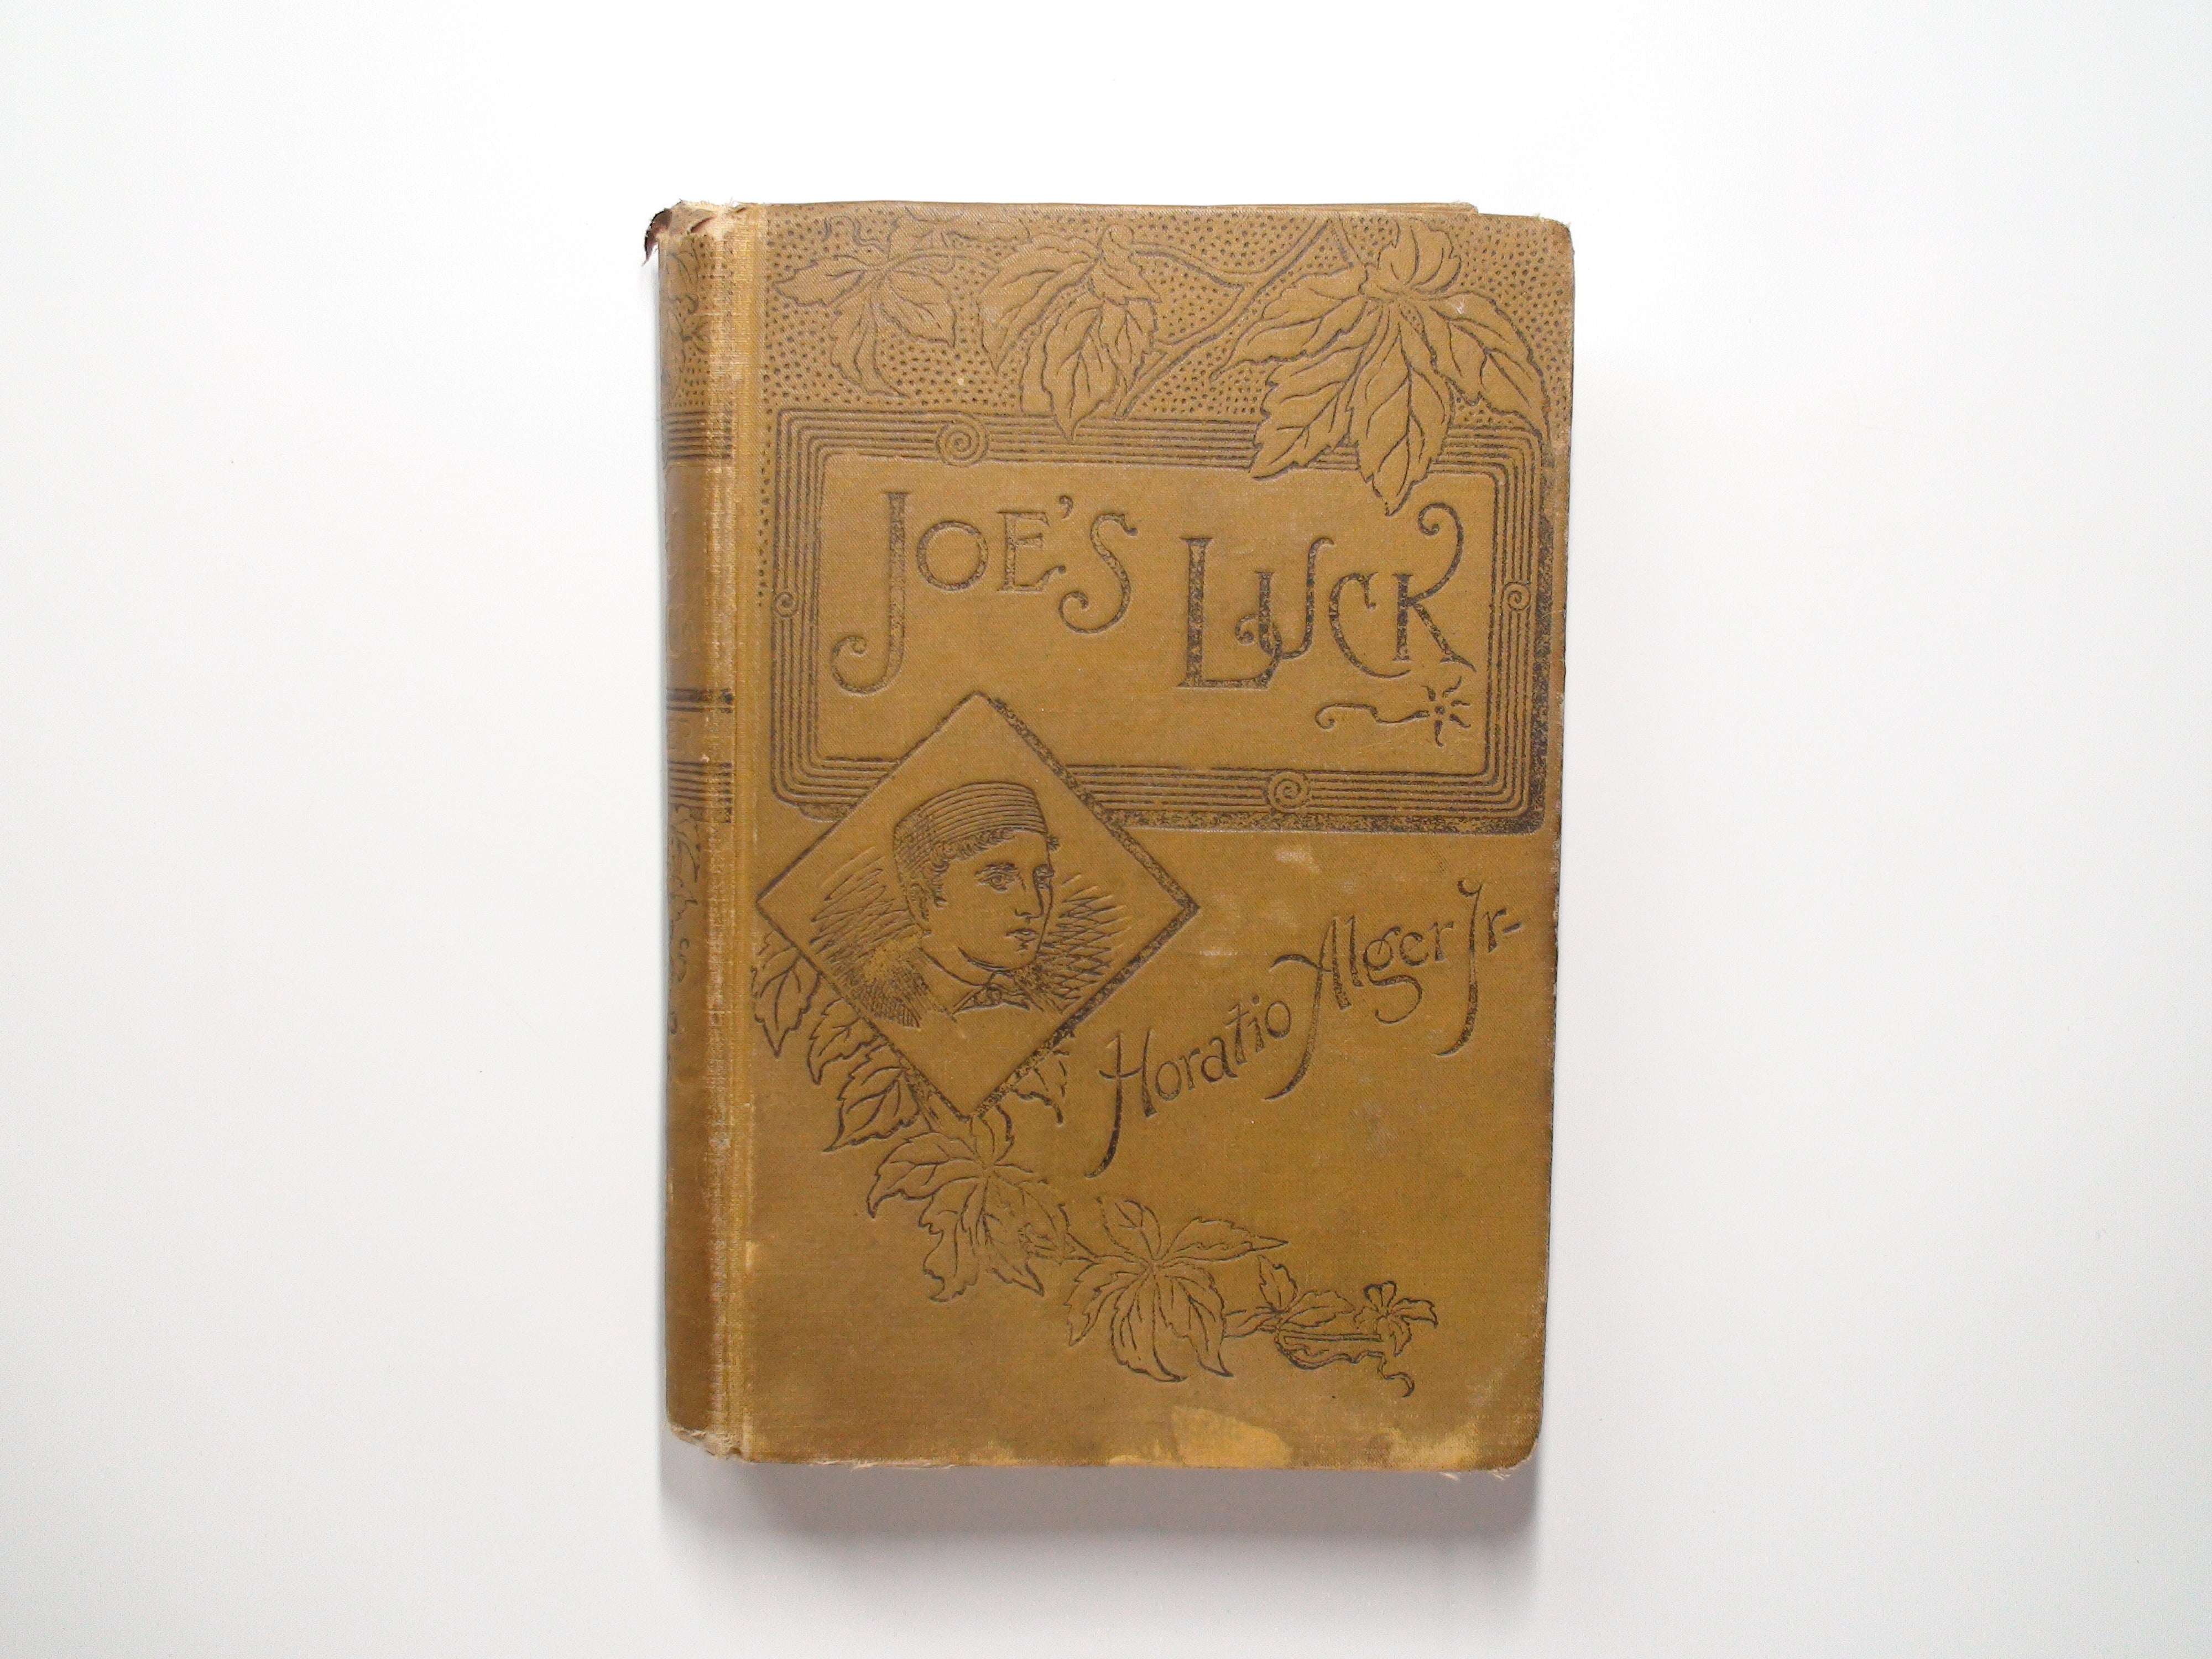 Joe's Luck, Boy's Adventures in California, by Horatio Alger, Illustrated, 1887